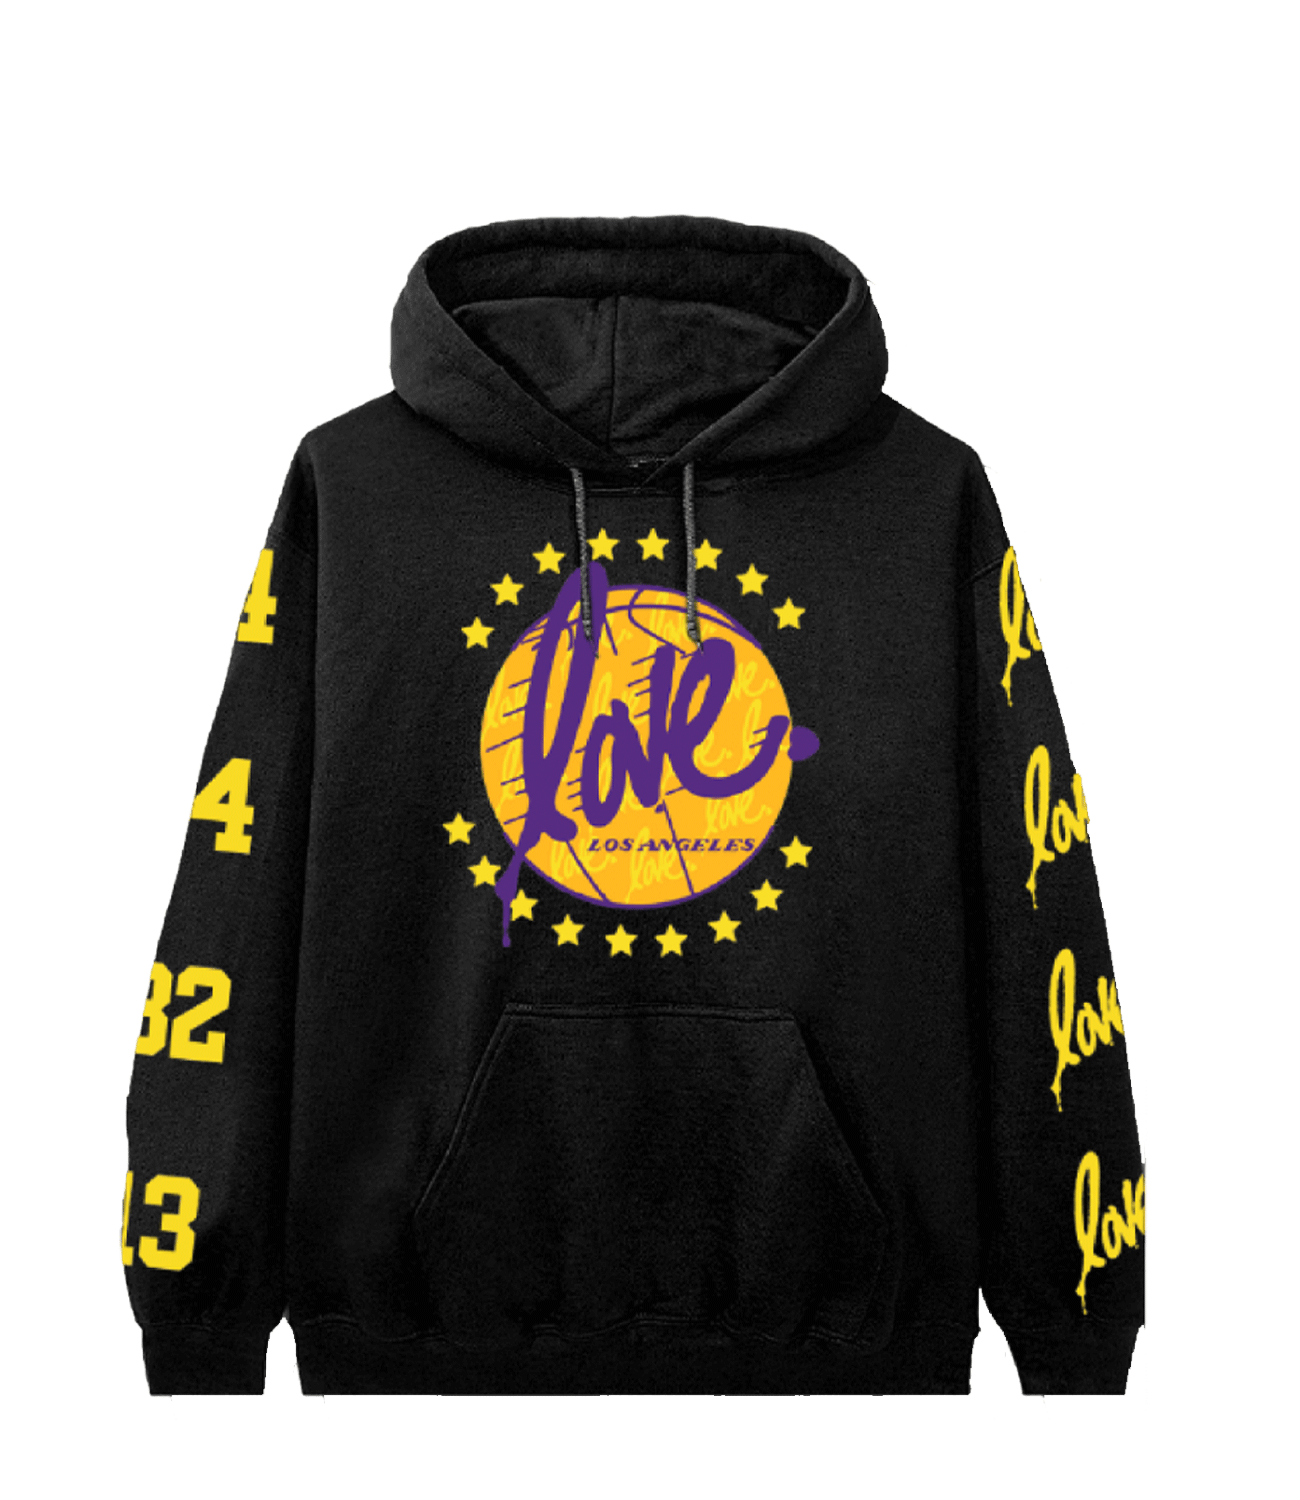 The Lakers Championship Hoodie